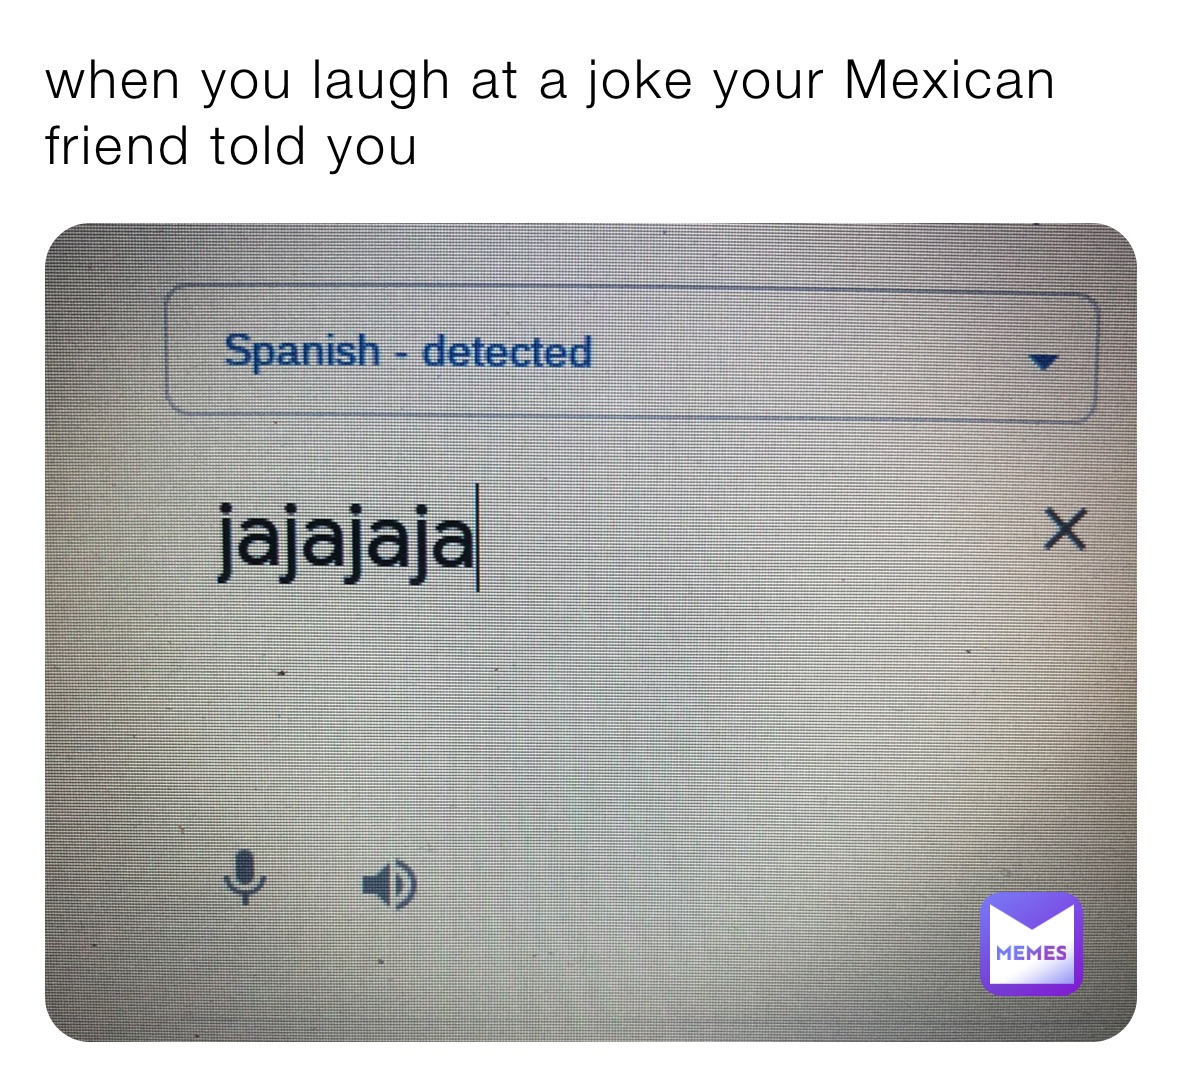 when you laugh at a joke your Mexican friend told you